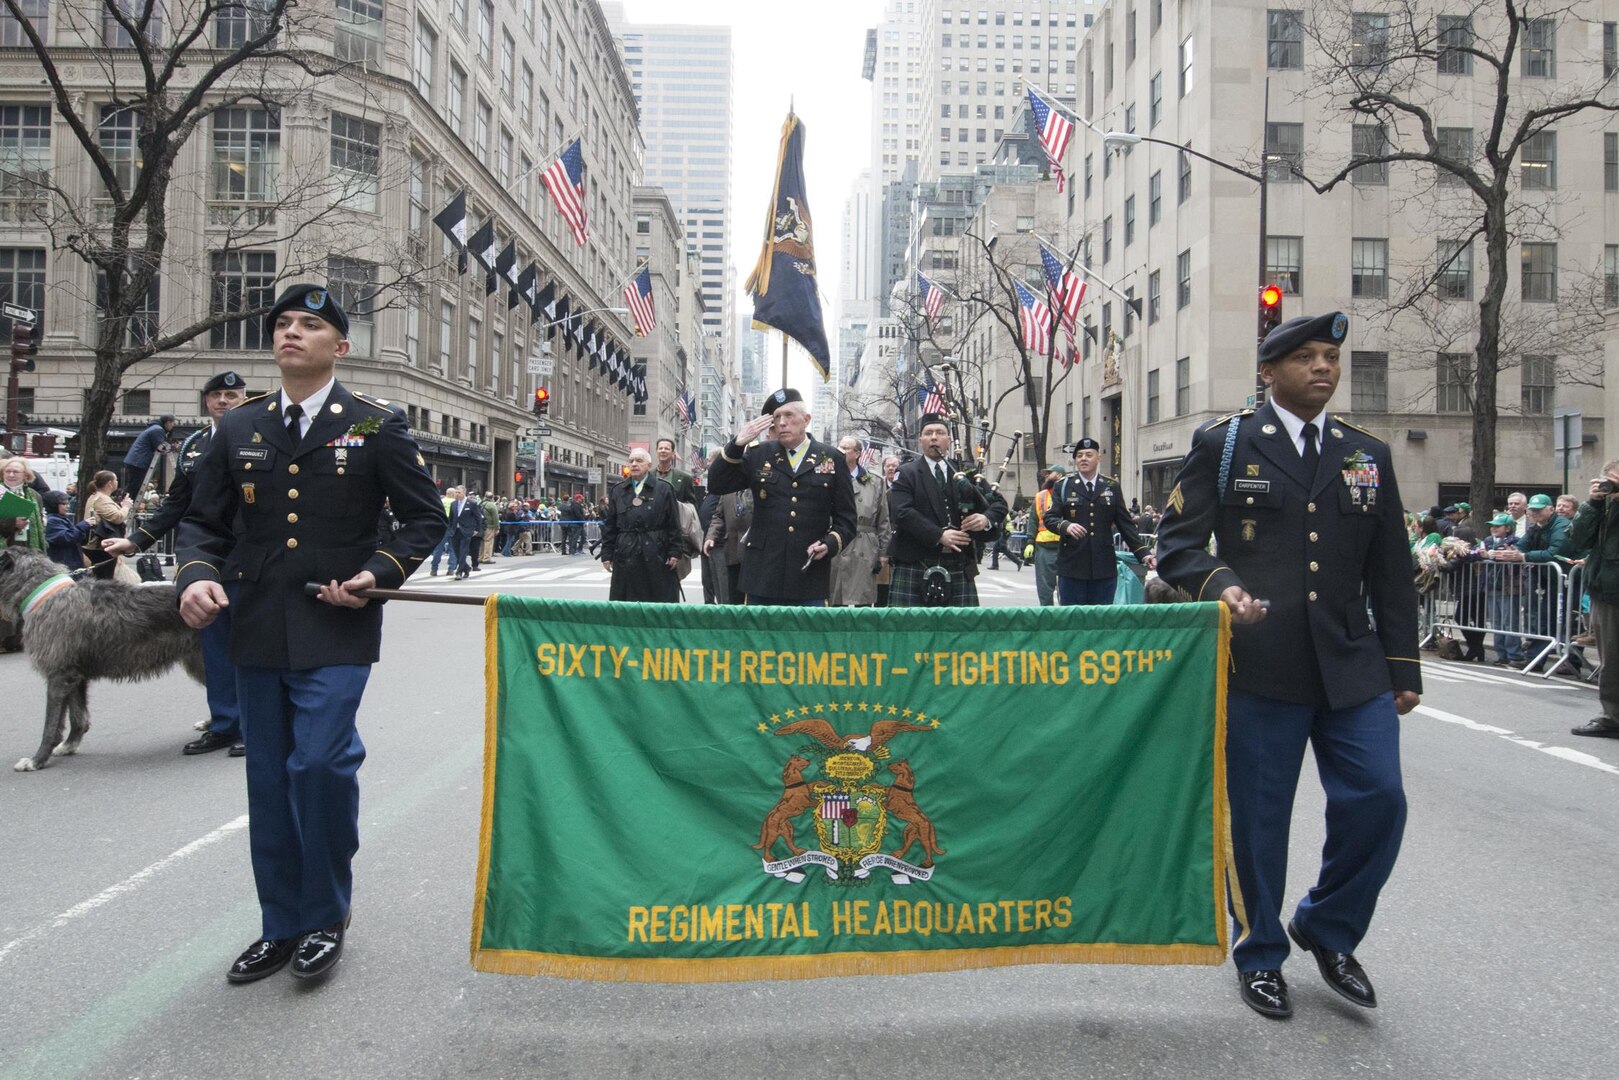 New York Army Guard "Fighting 69th" unit marches in the St. Patricks Day parade in New York City on March 17, 2015. 